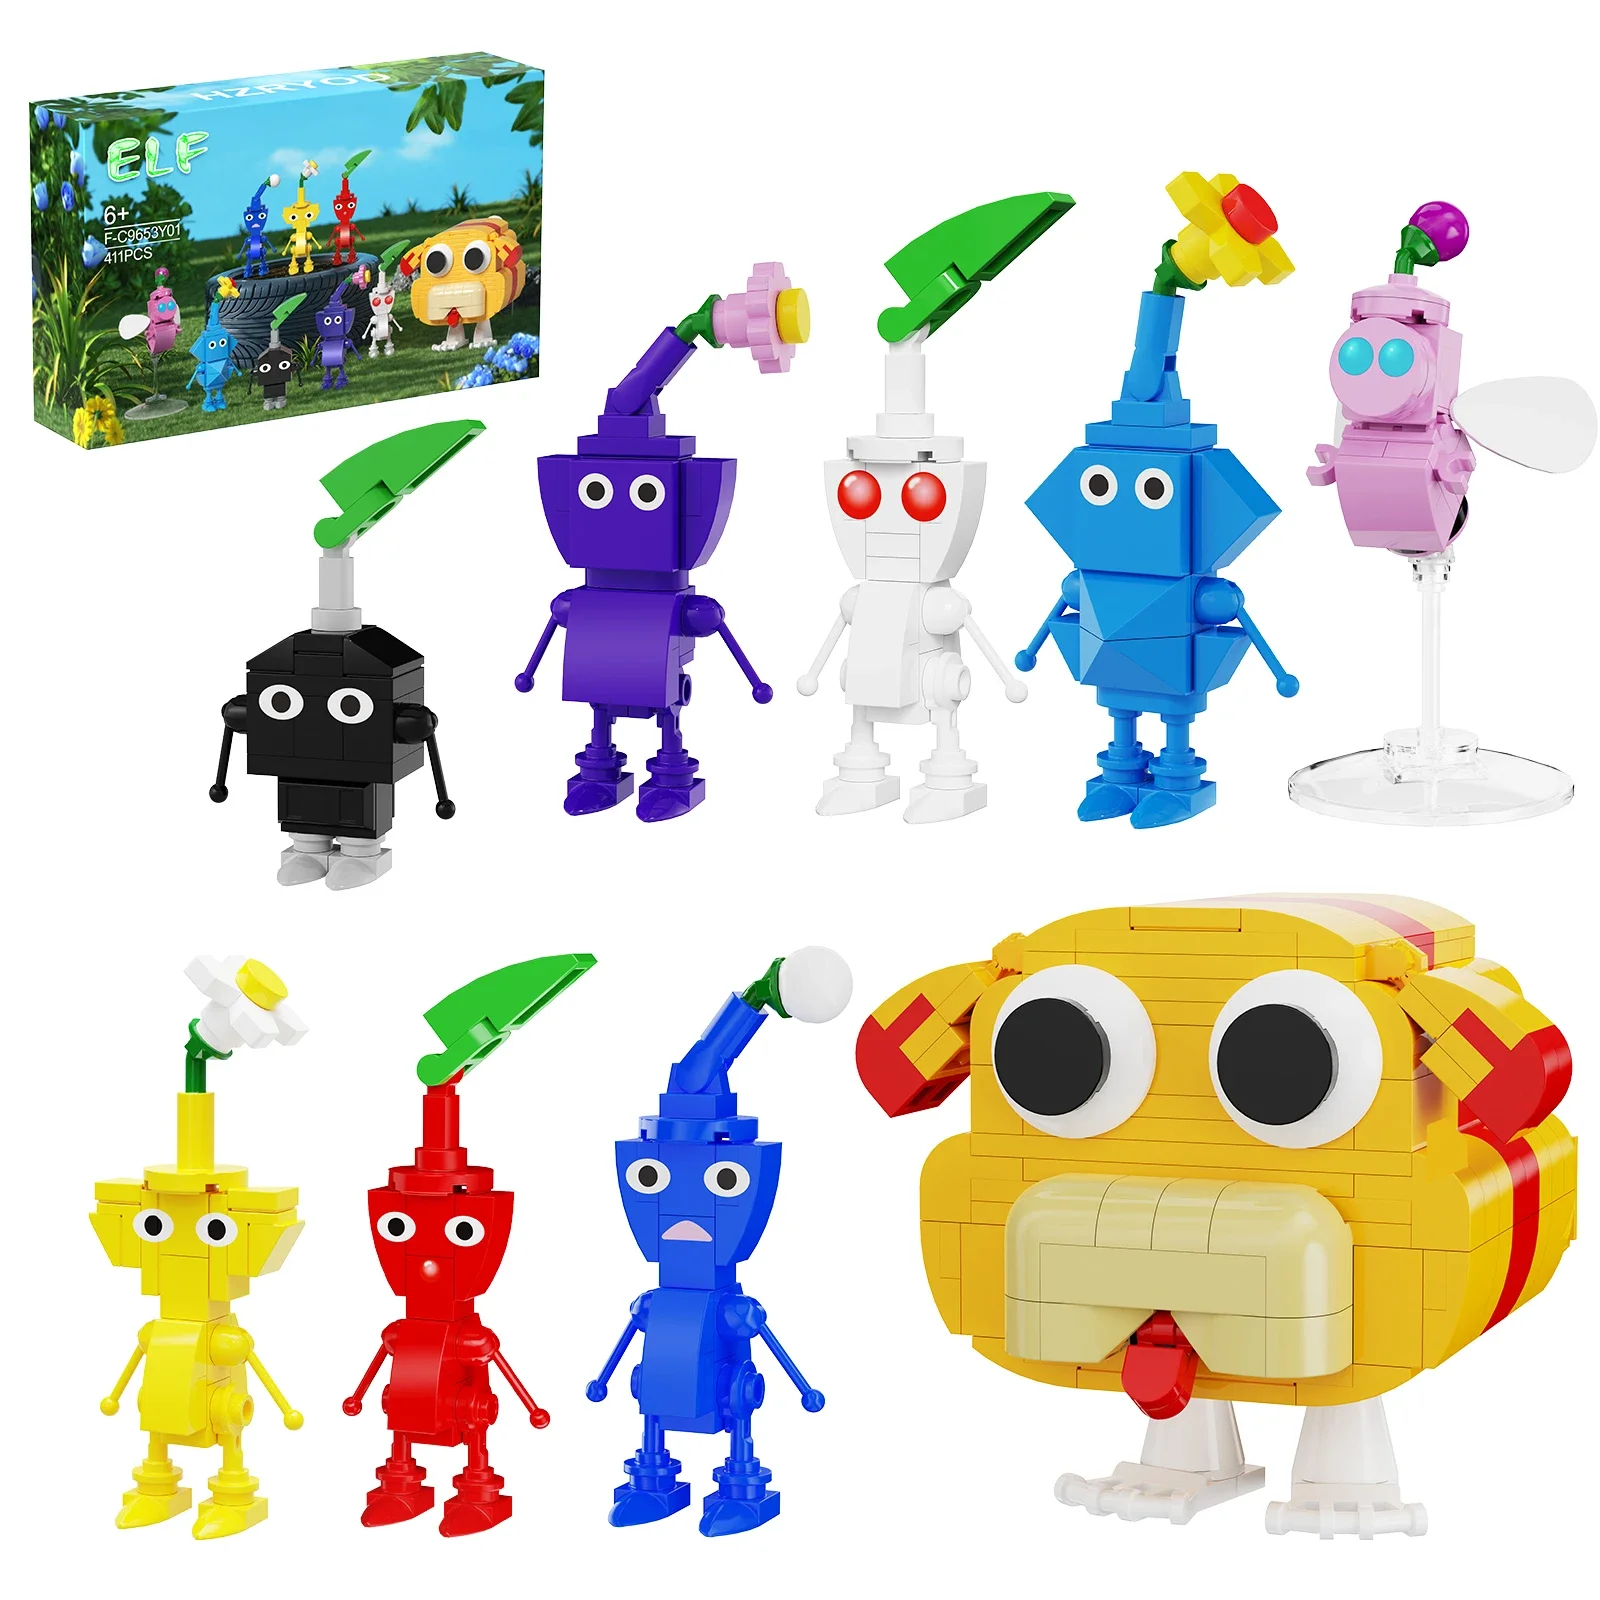 

MOC NEW 9 In 1 Cartoon Anime Pikmin Figures Building Blocks Set Cute Game Role Bricks Toys For Children Birthday Christmas Gifts